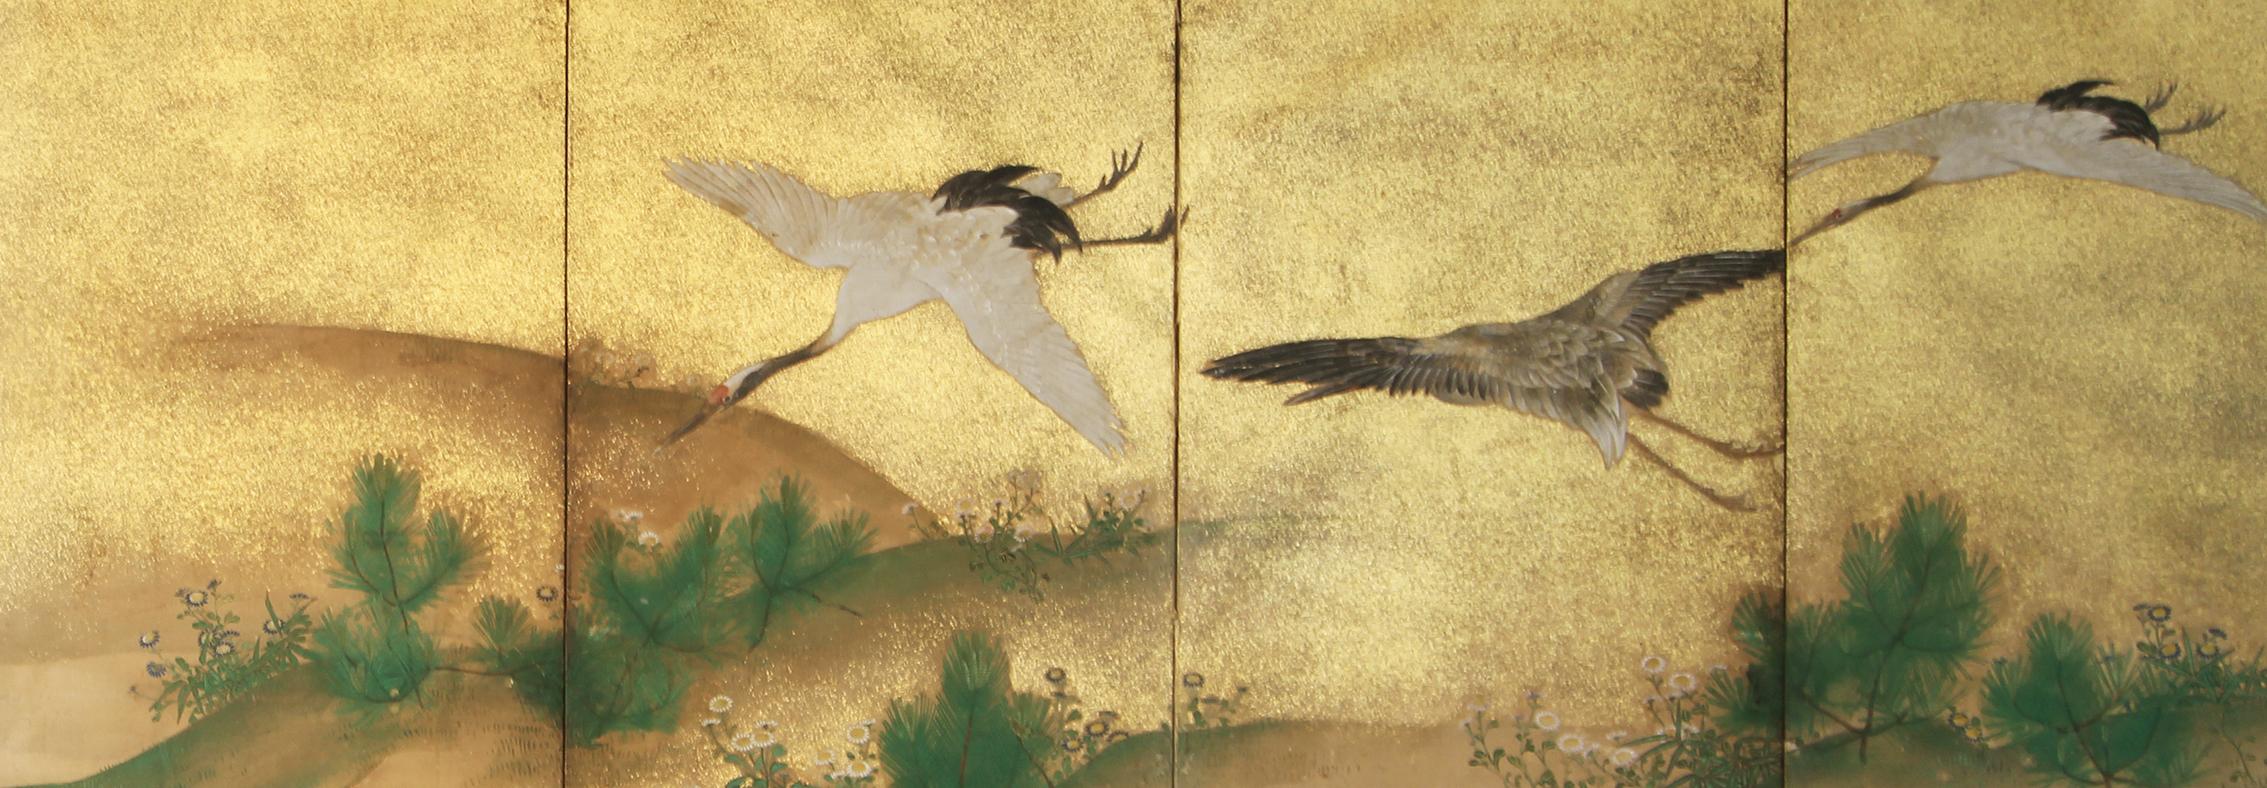 19th Century, Japanese Screen 8 Panels Flying Cranes over the Golden Landscape 1